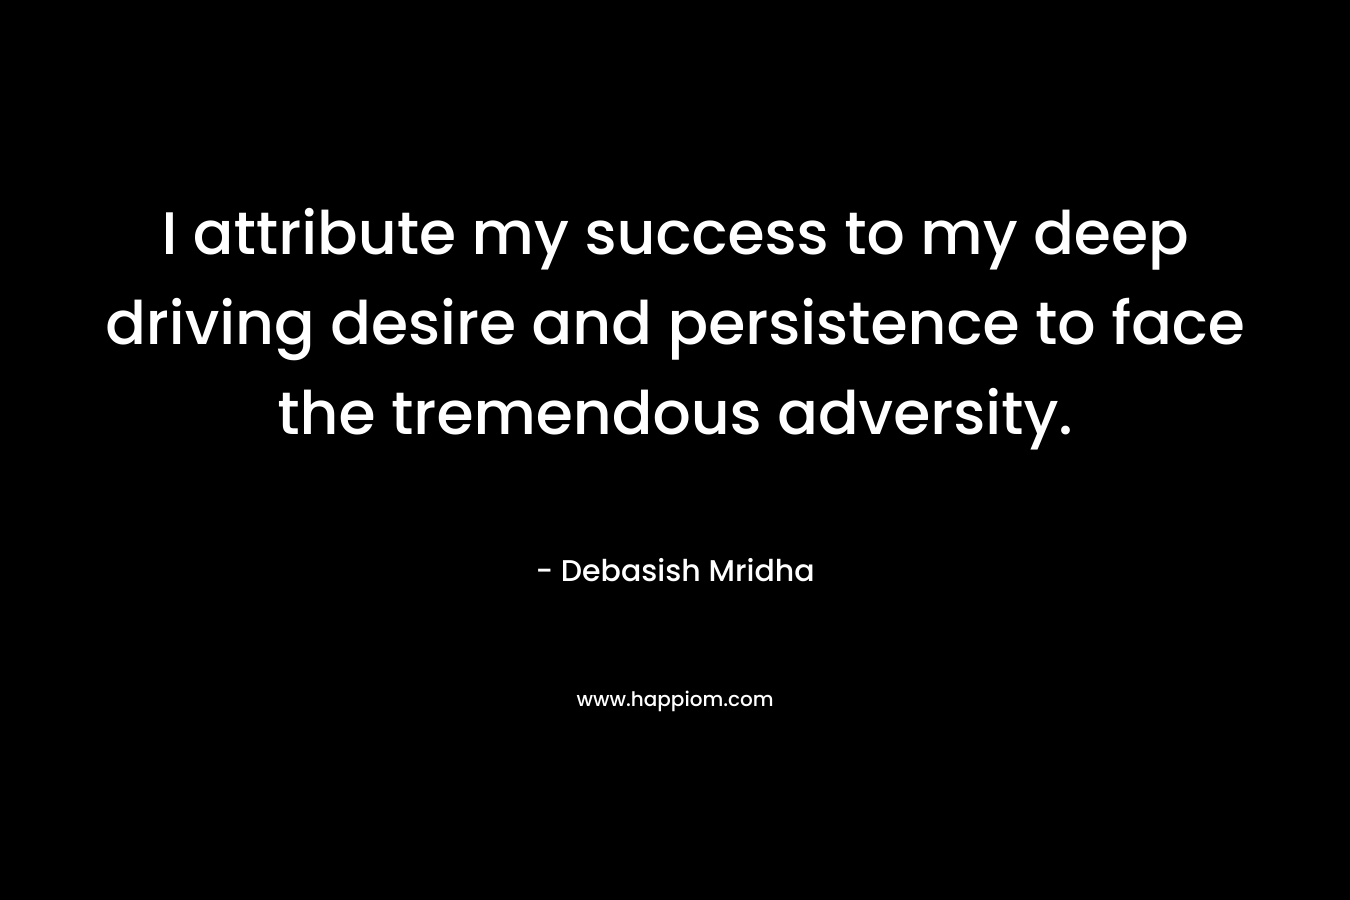 I attribute my success to my deep driving desire and persistence to face the tremendous adversity.